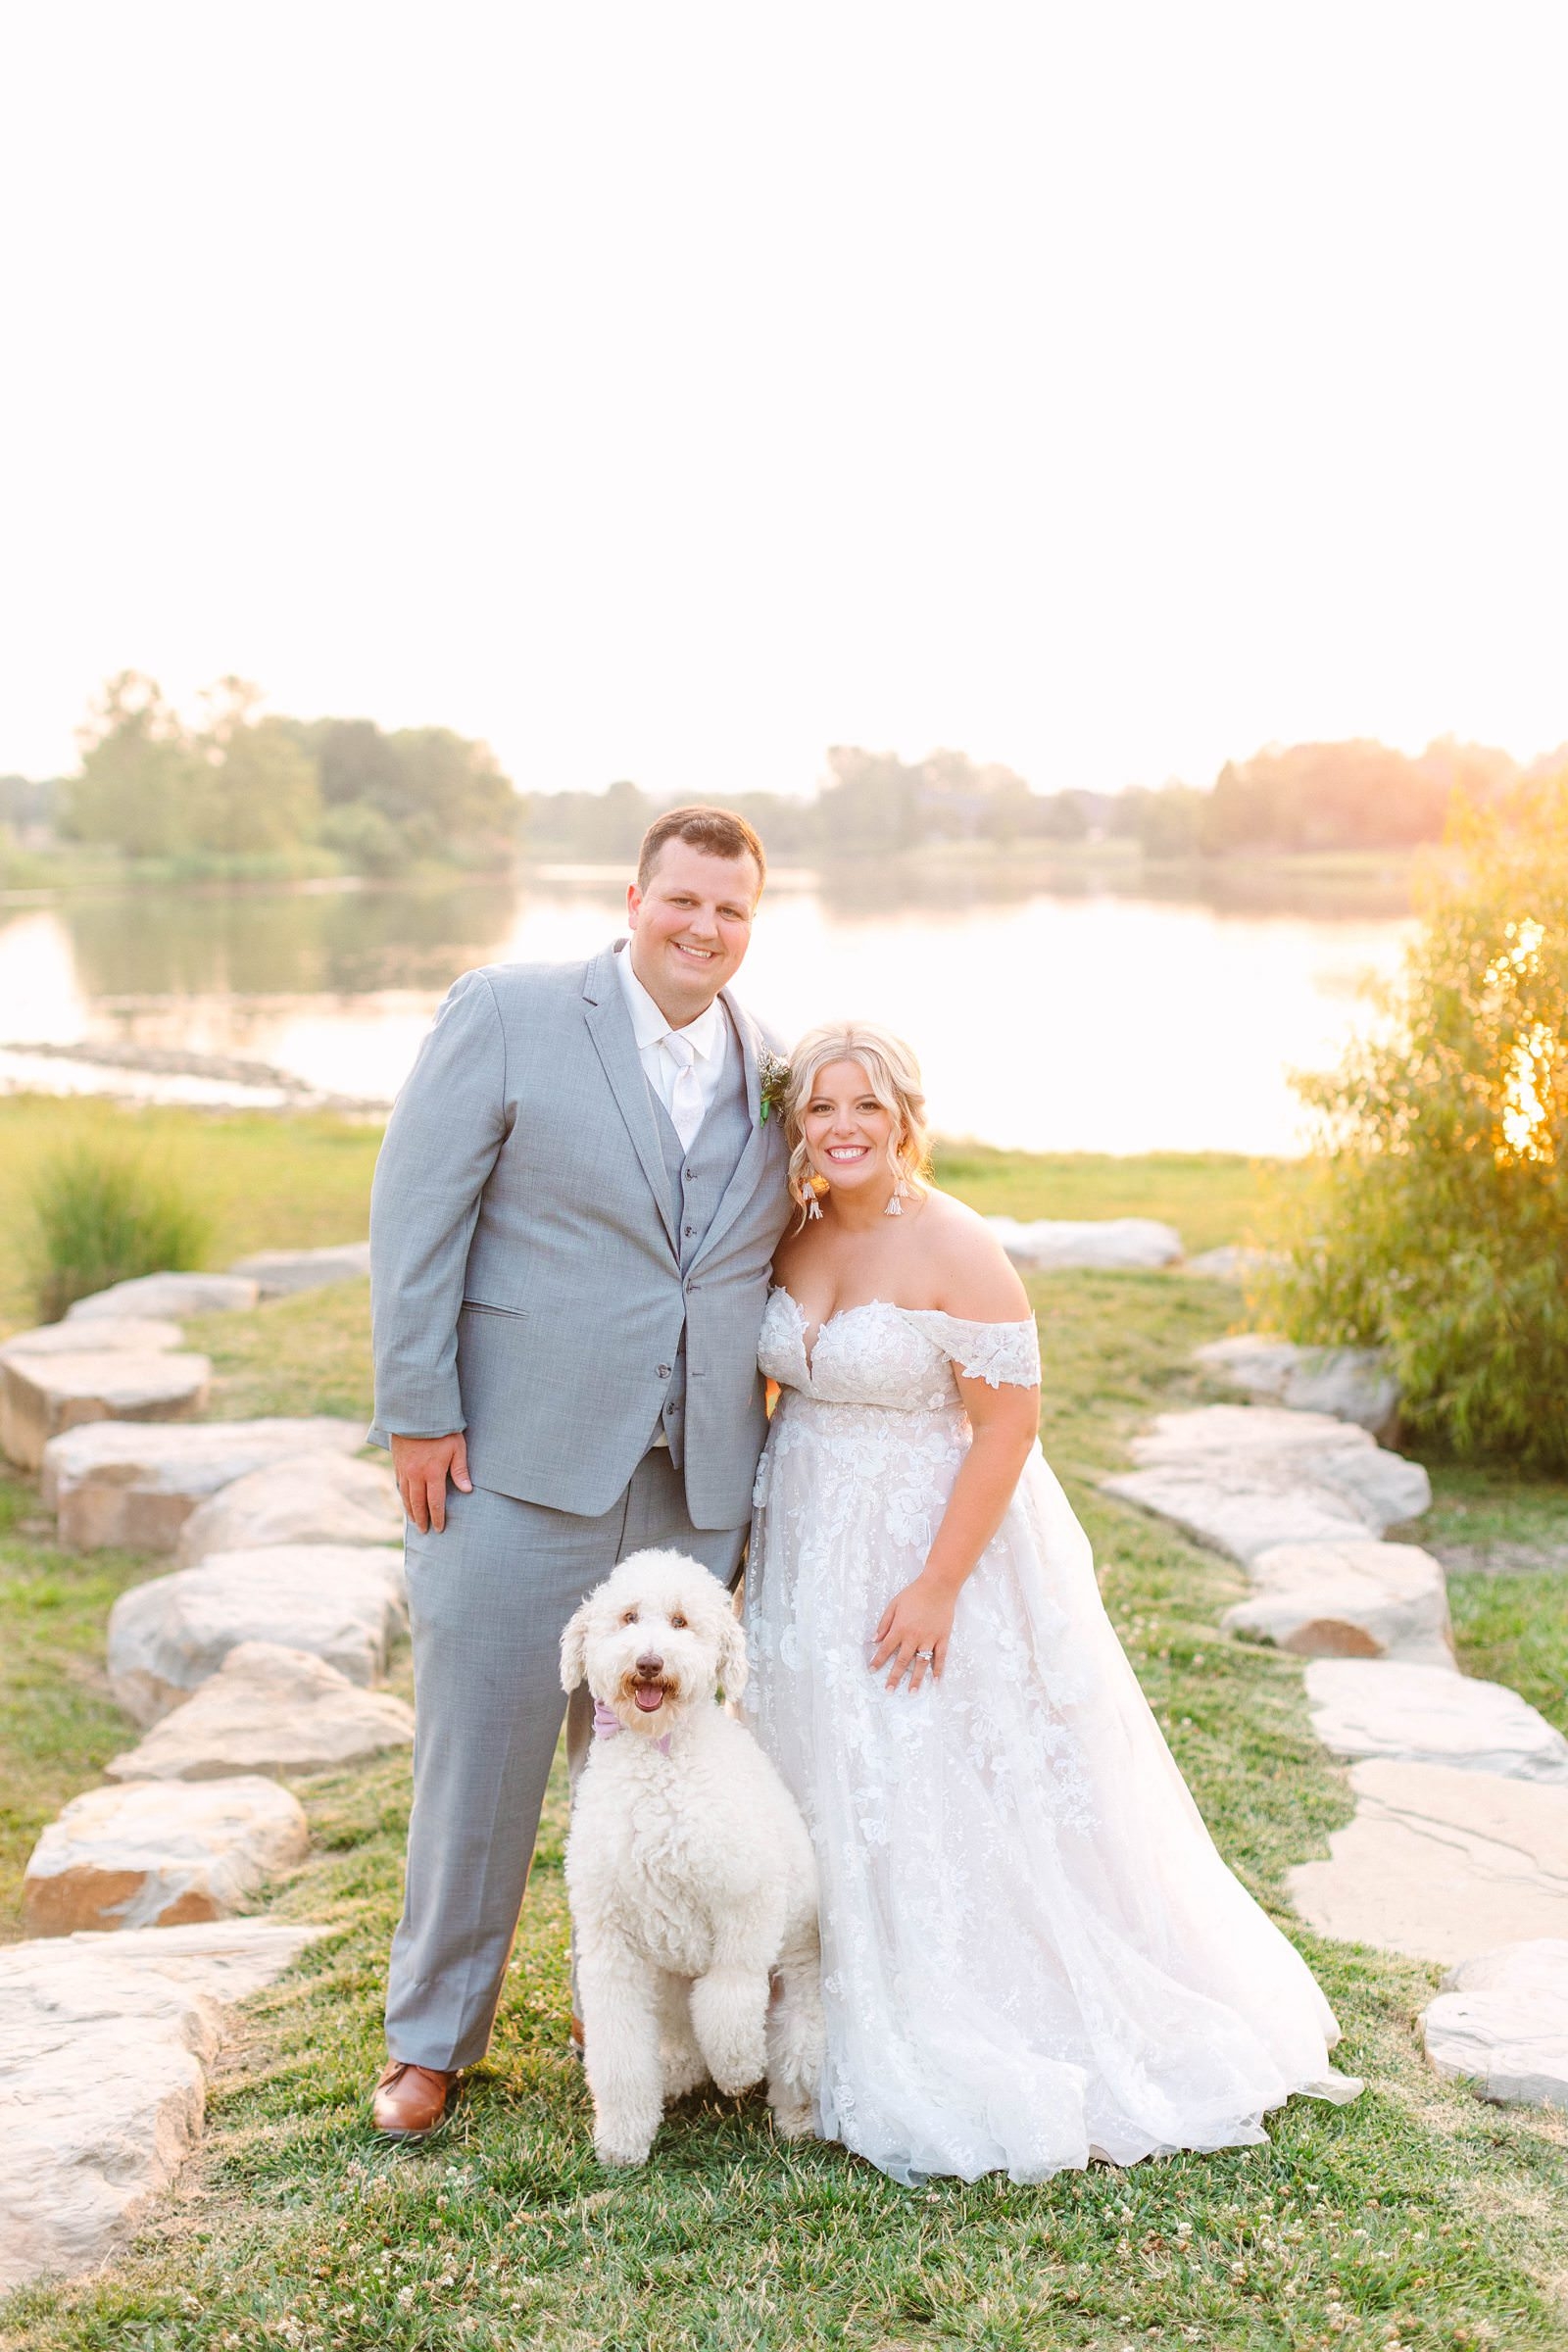 A Sunny Summer Wedding at Friedman Park in Newburgh Indiana | Paige and Dylan | Bret and Brandie Photography177.jpg